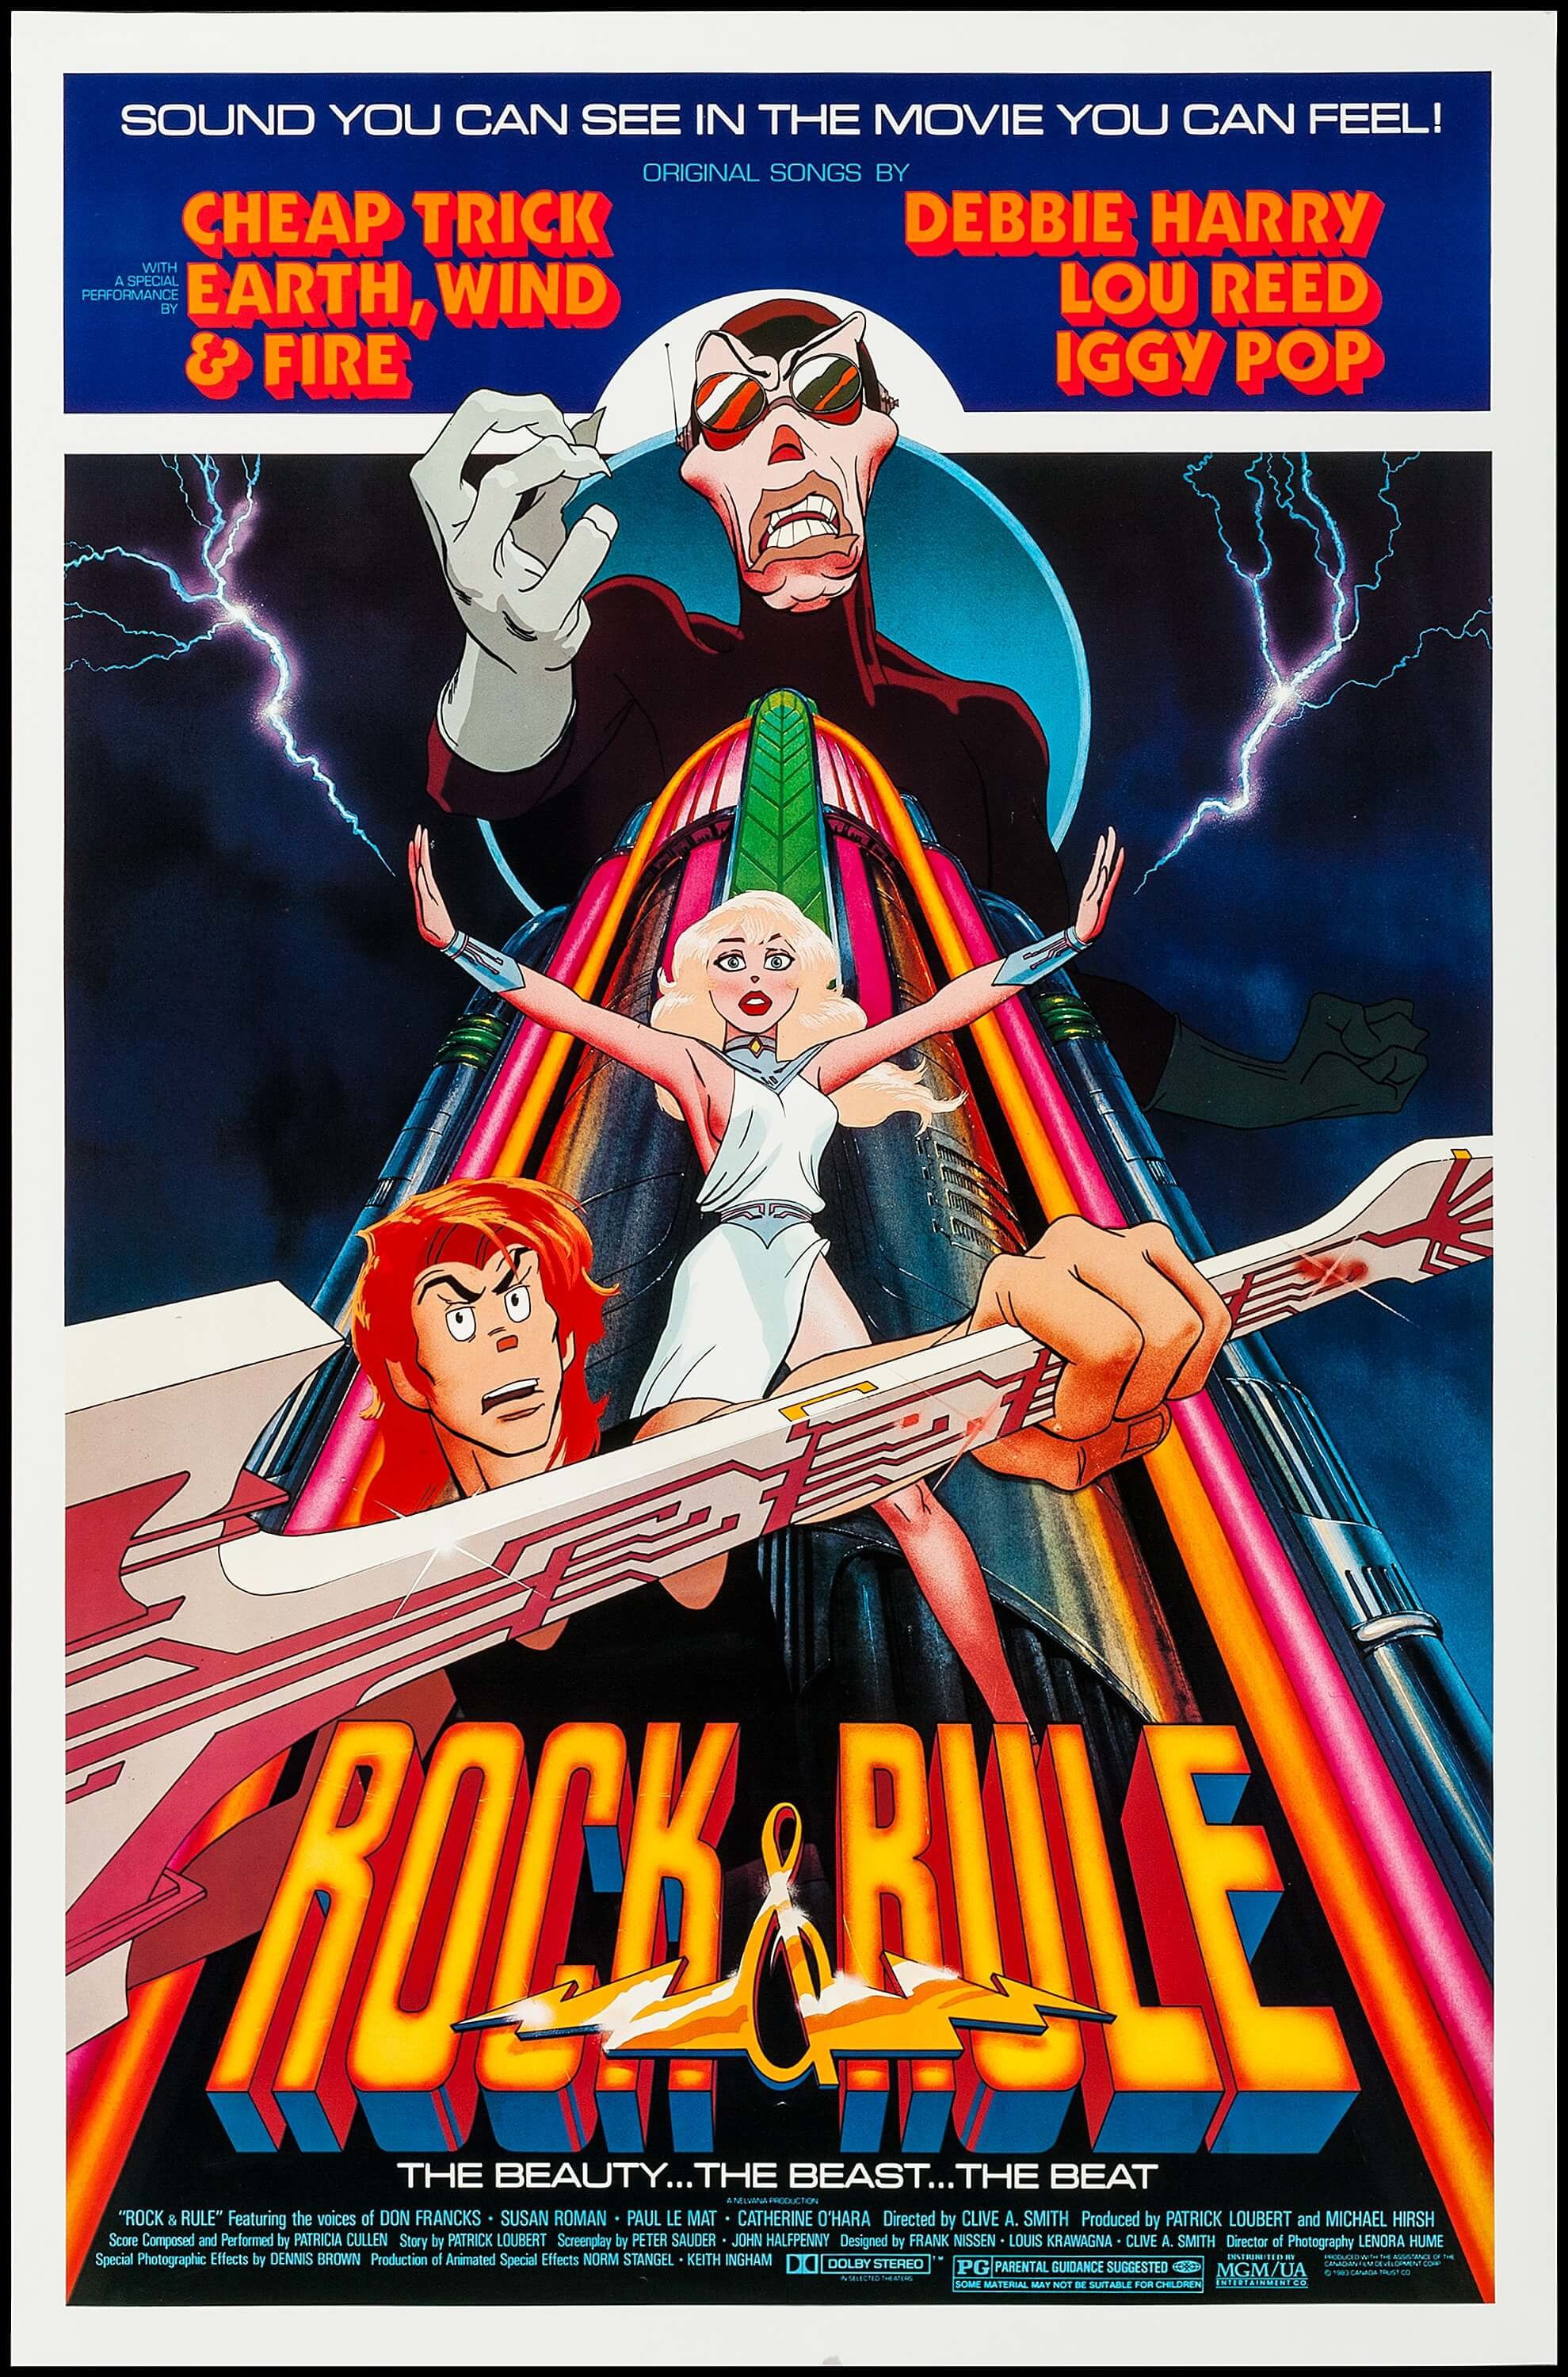 Rock & Rule (1983) with English Subtitles on DVD on DVD